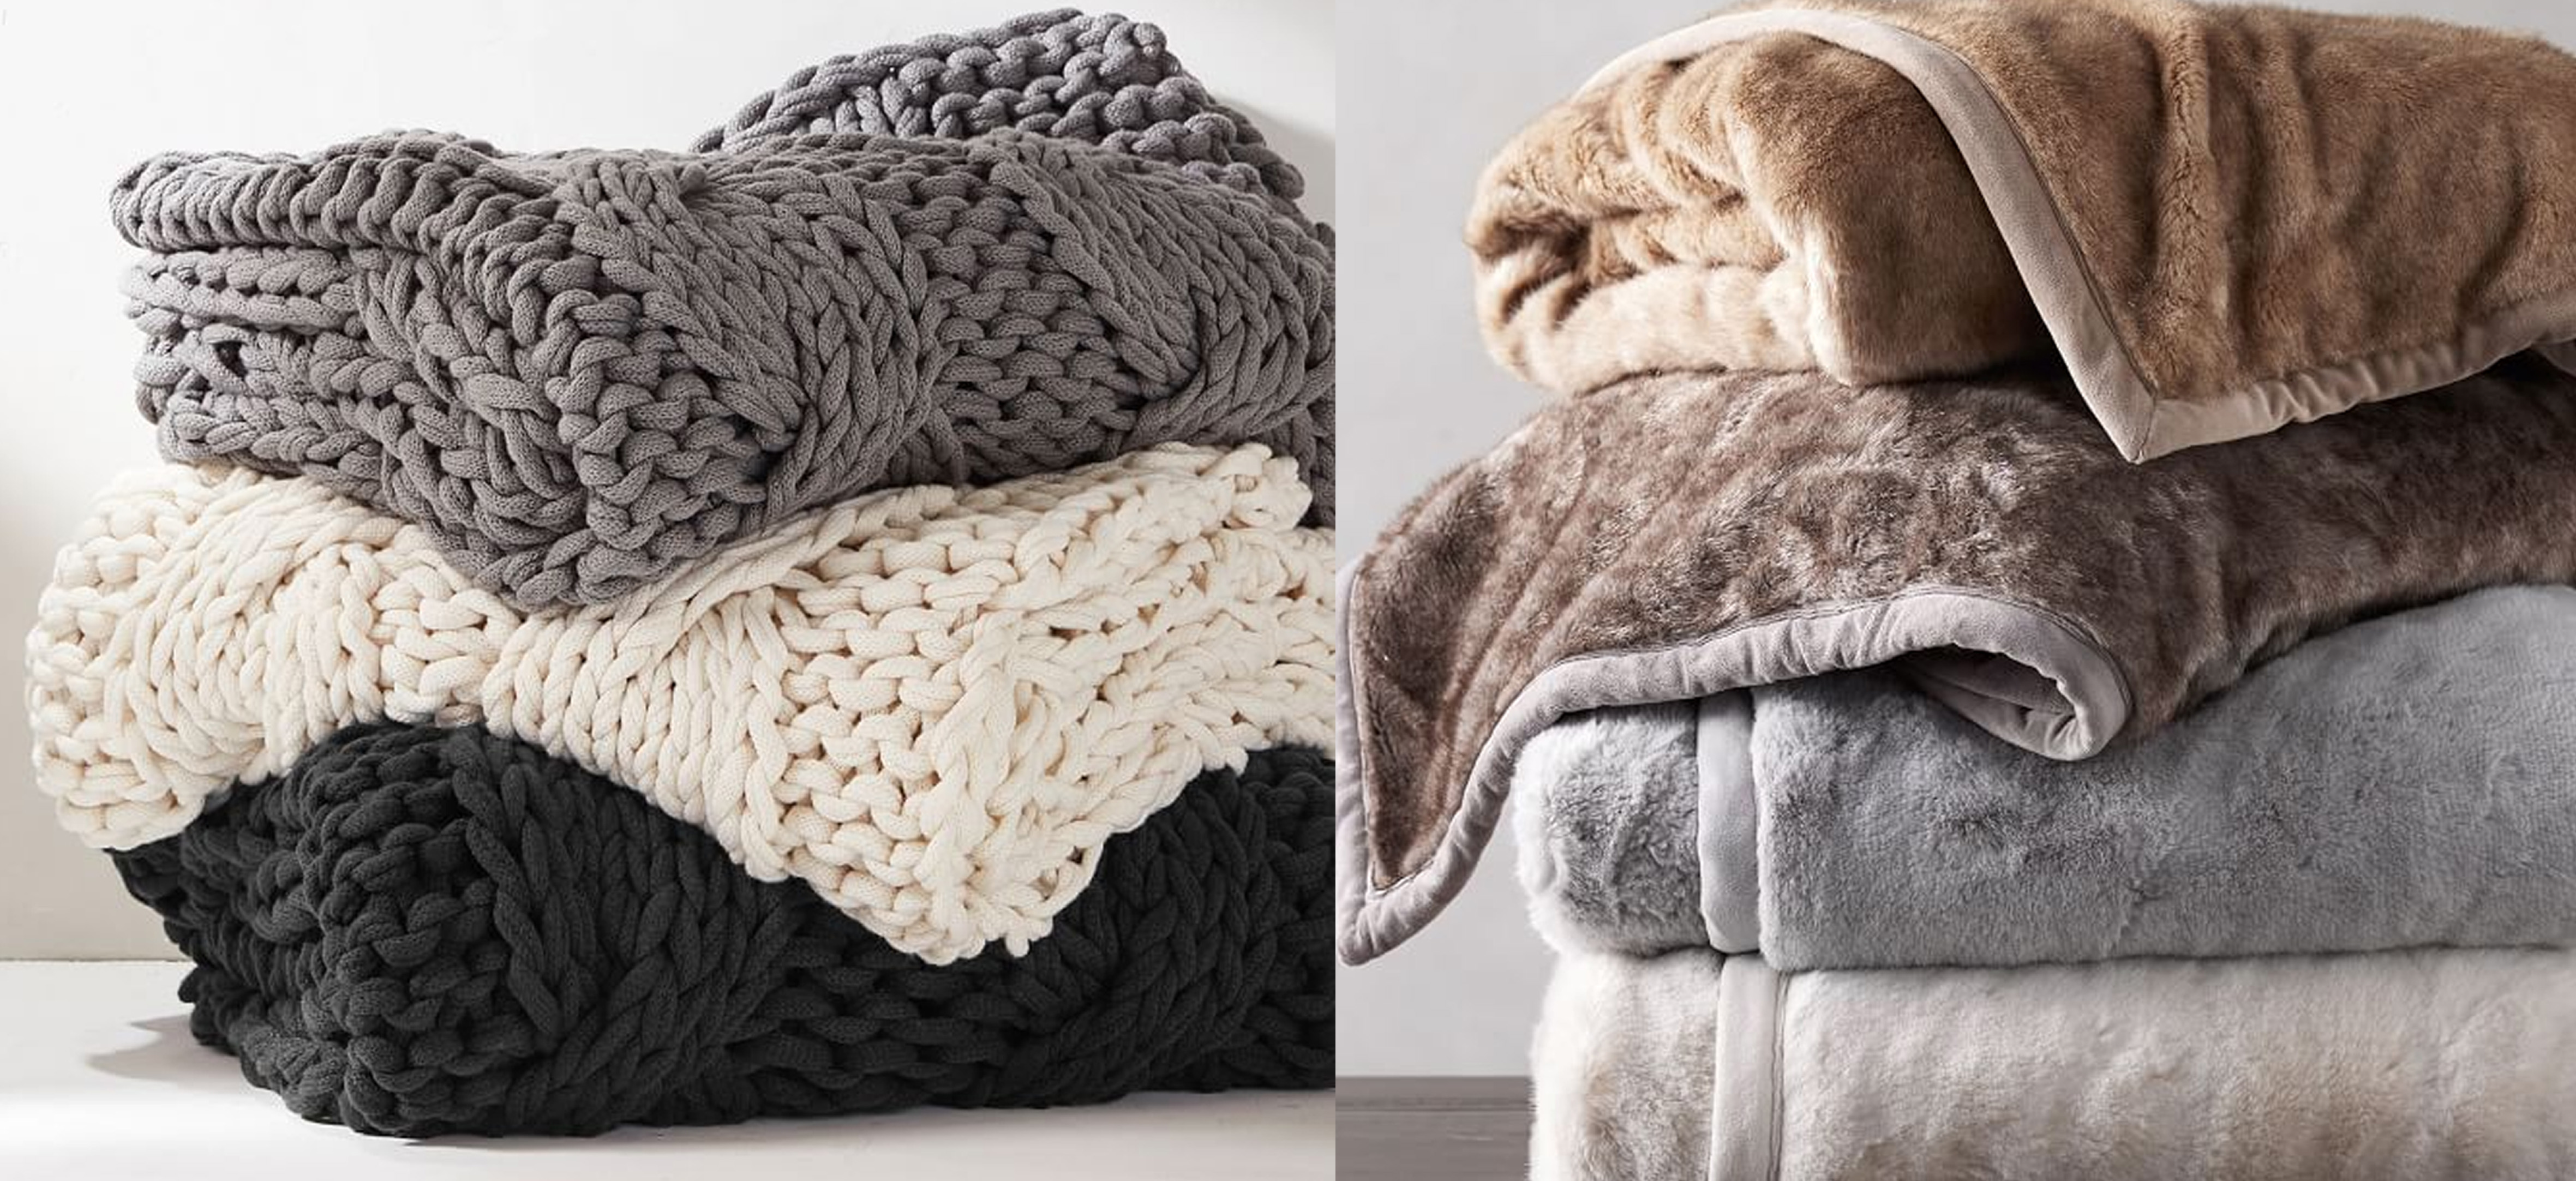 The best cozy blankets to stay warm this winter from $34 - 9to5Toys